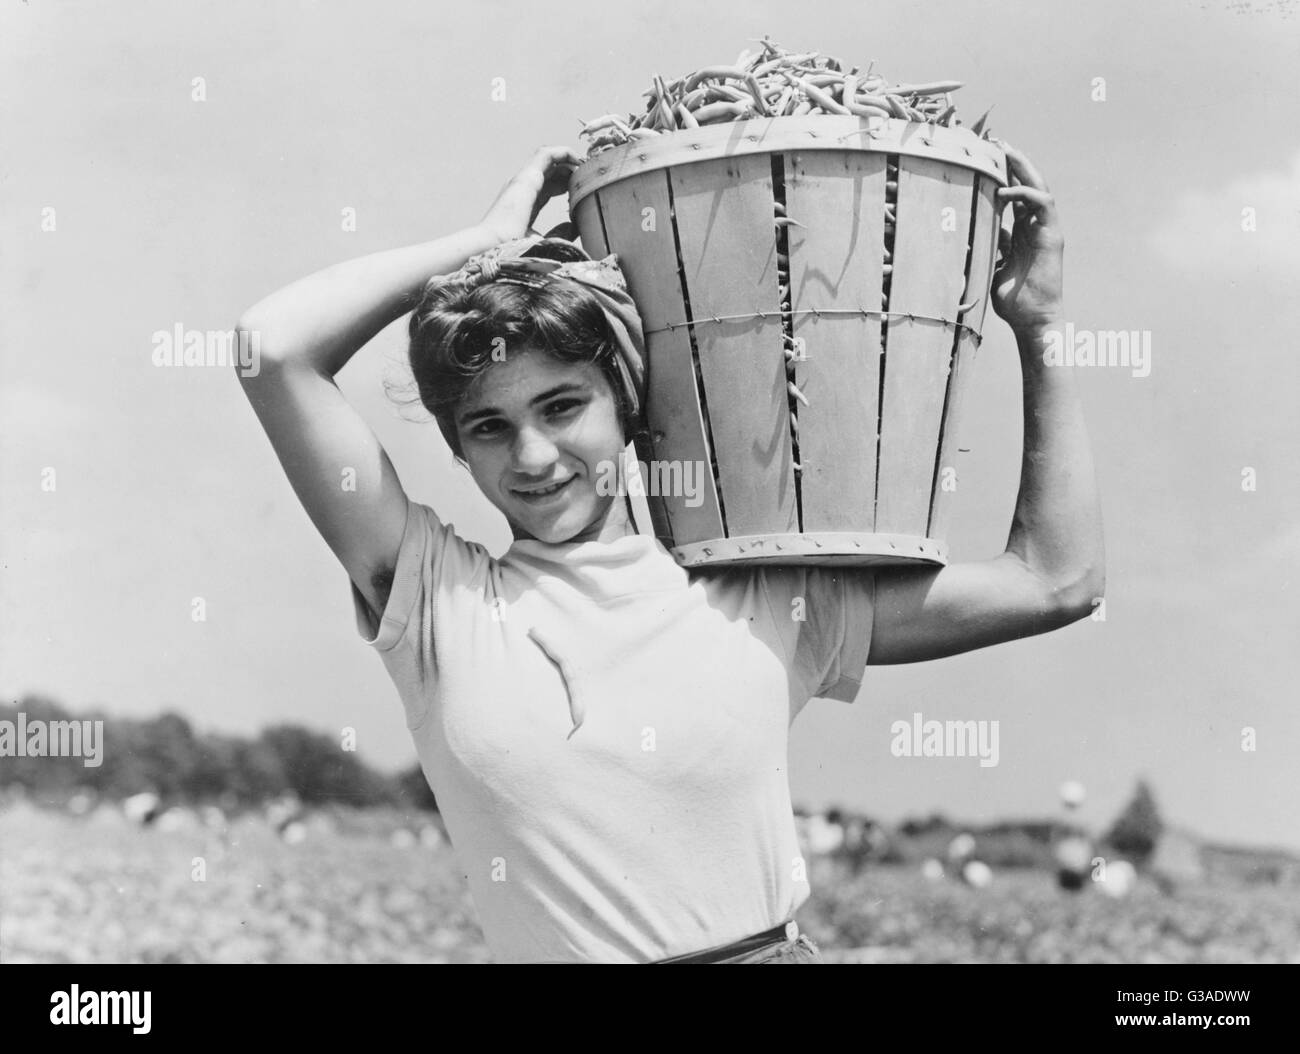 Italian day laborer with basket of beans she has just picked. Seabrook Farms, Bridgeton, New Jersey. Date 1941 May. Stock Photo